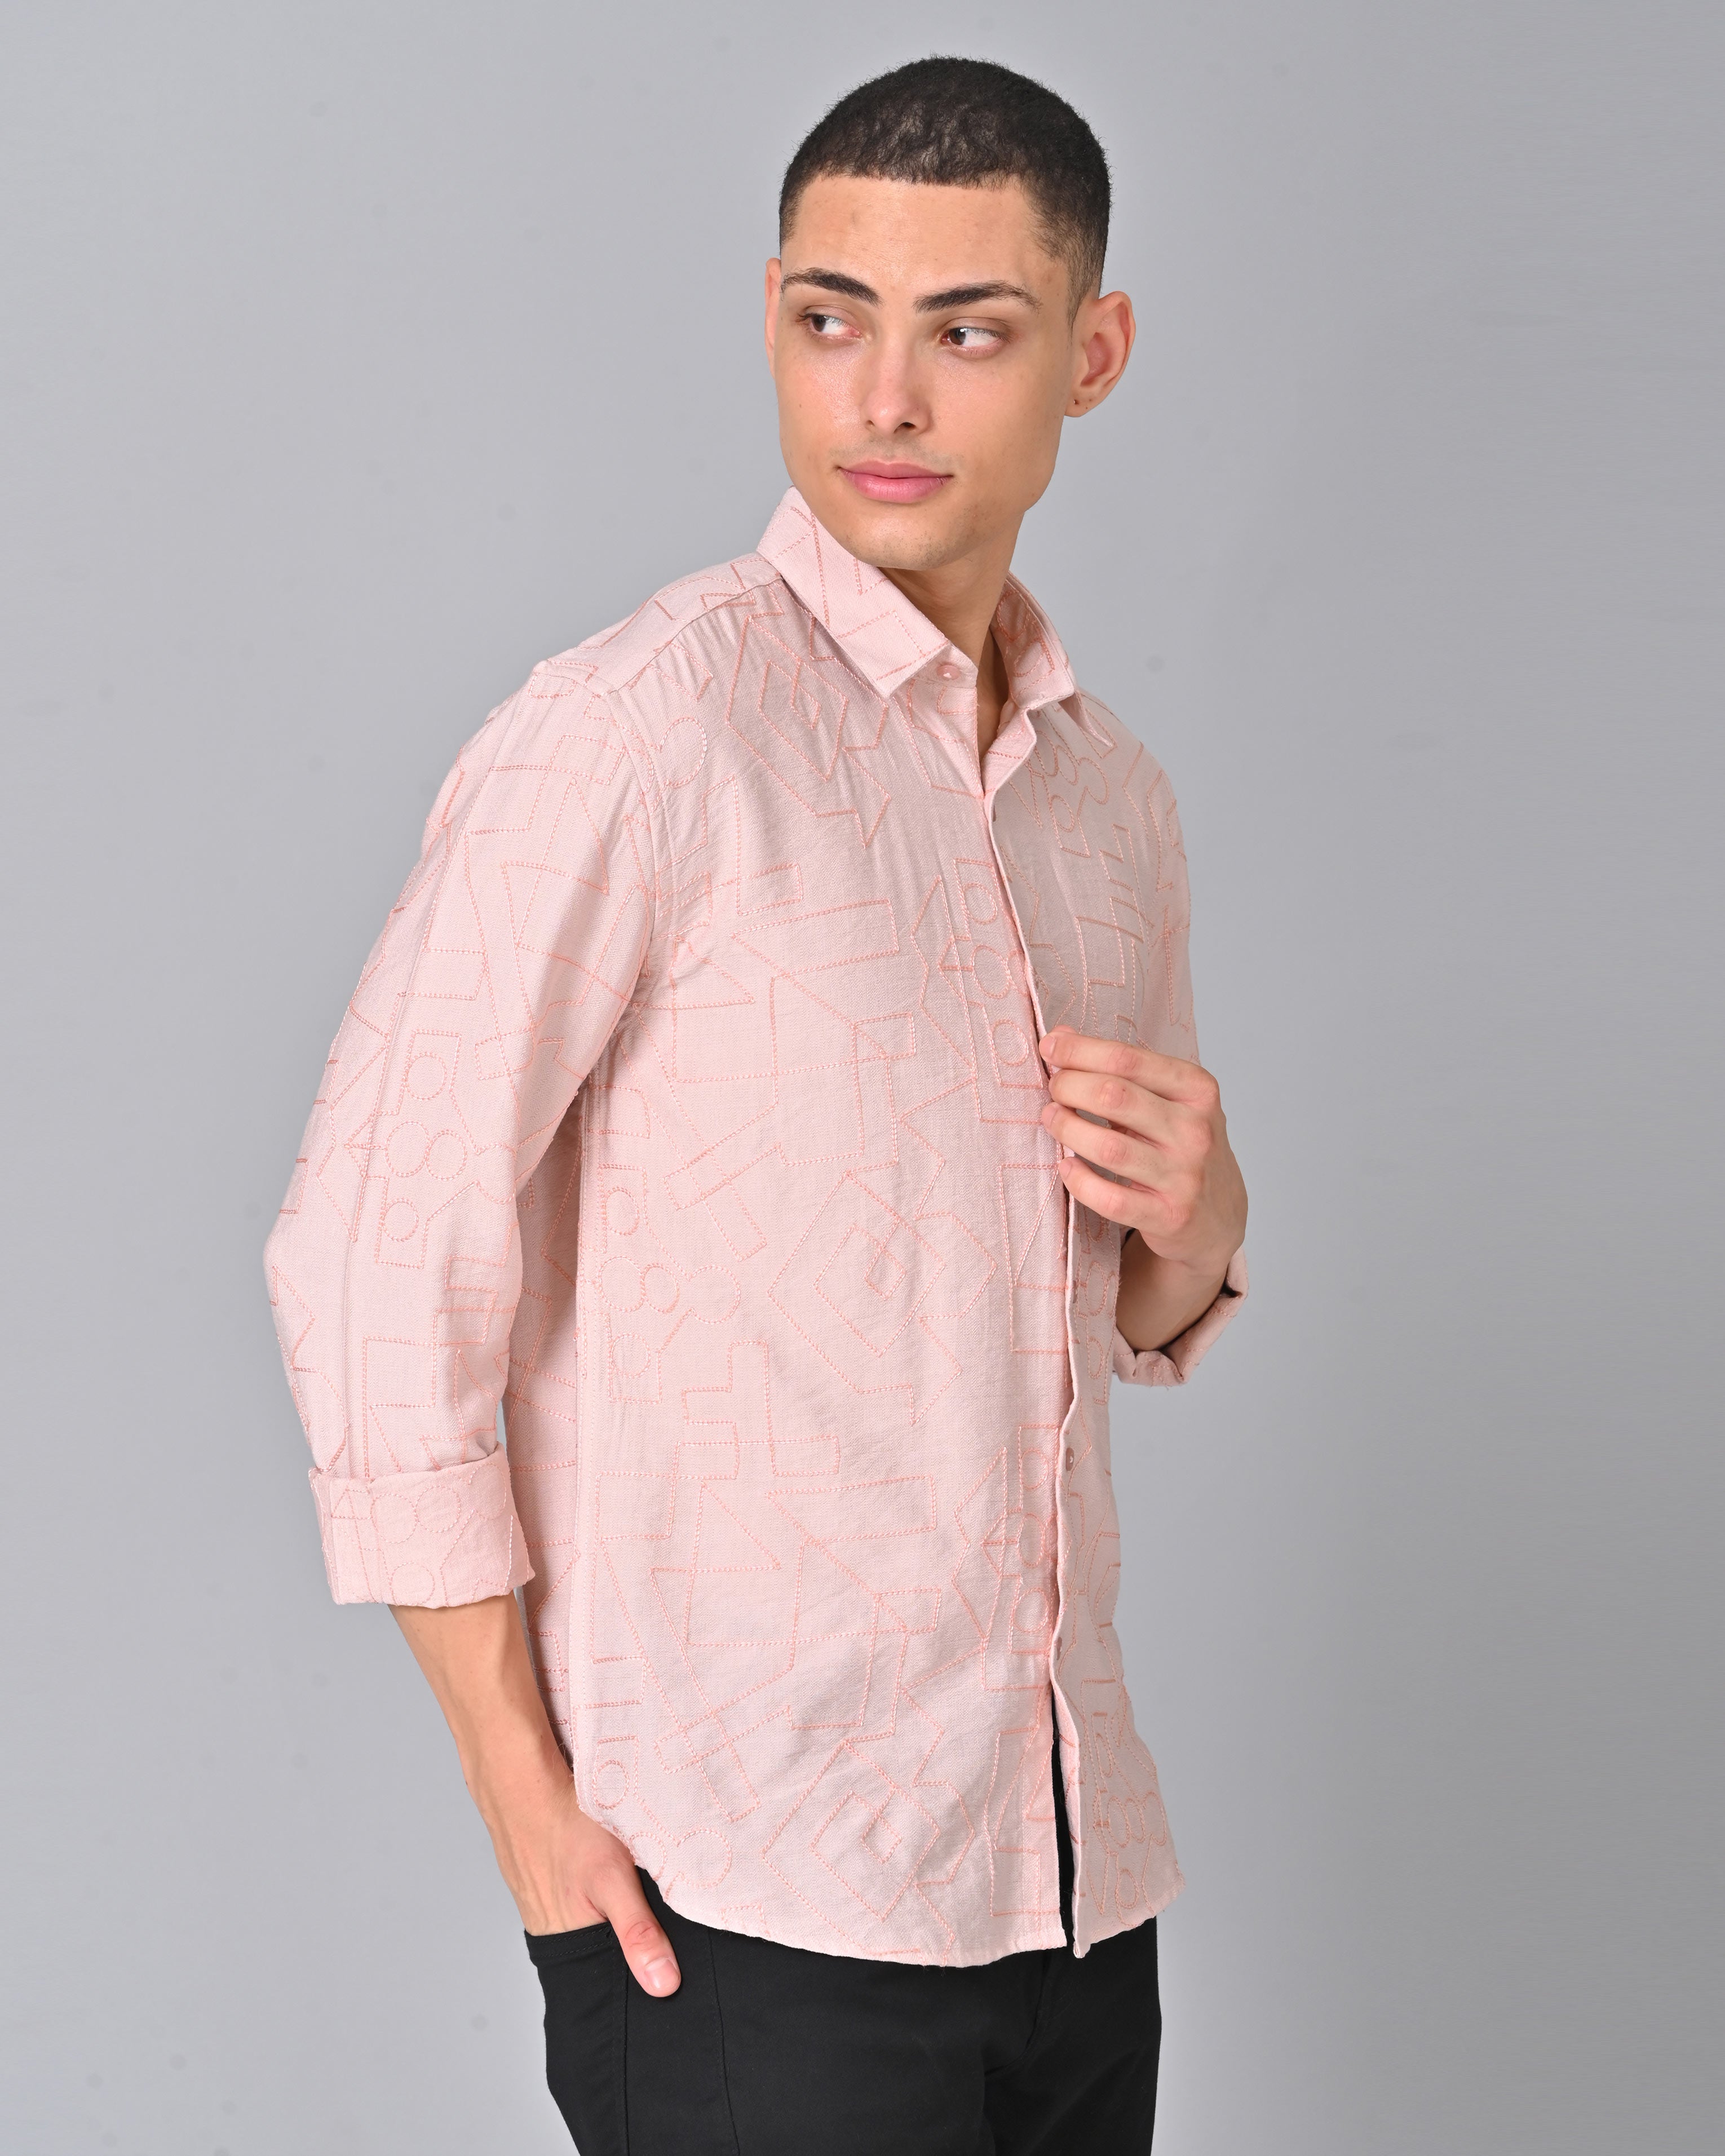 Buy Men's Embroidered Light Pink Cotton Shirt